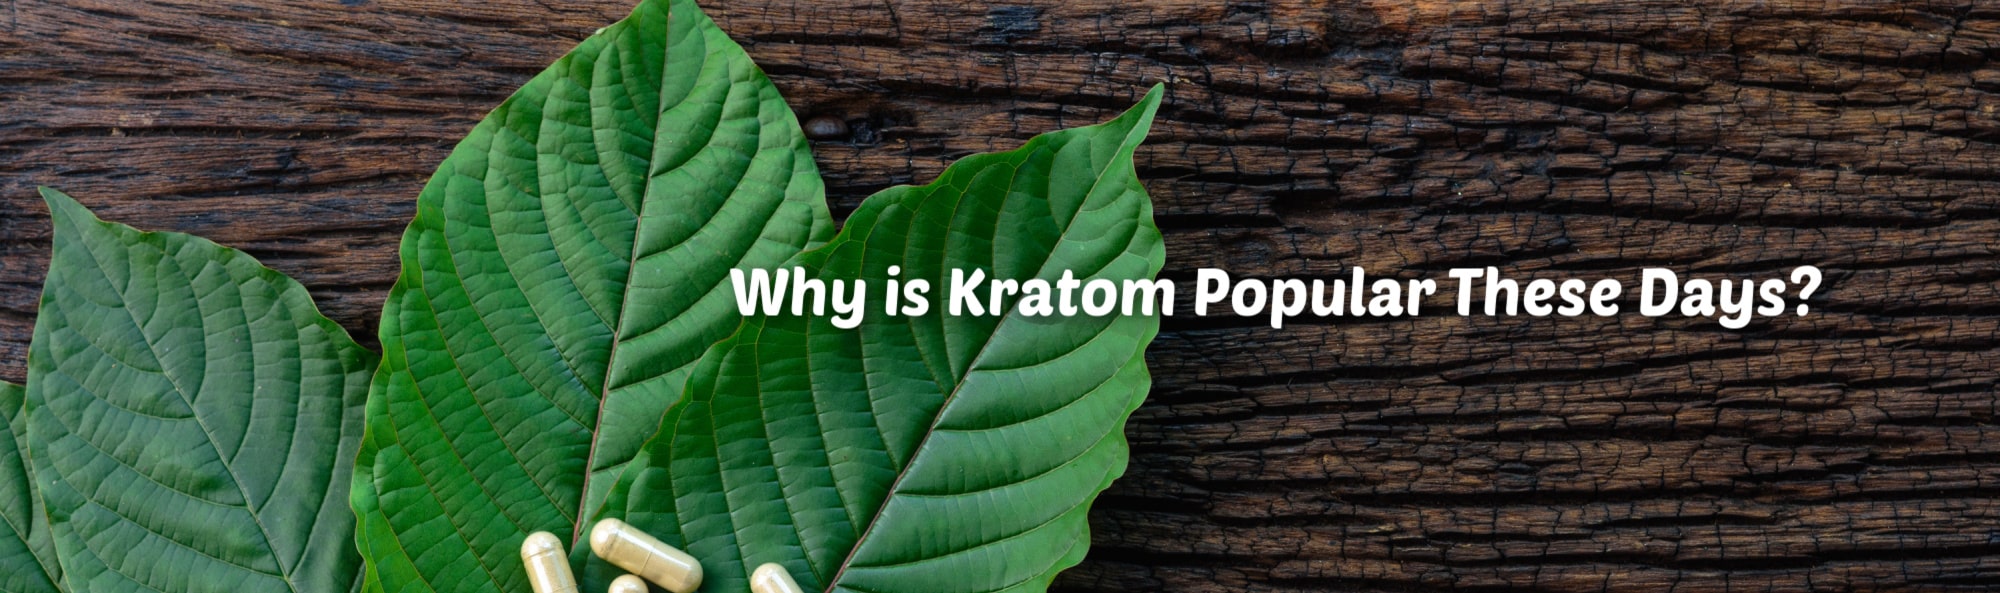 image of why is kratom popular these days